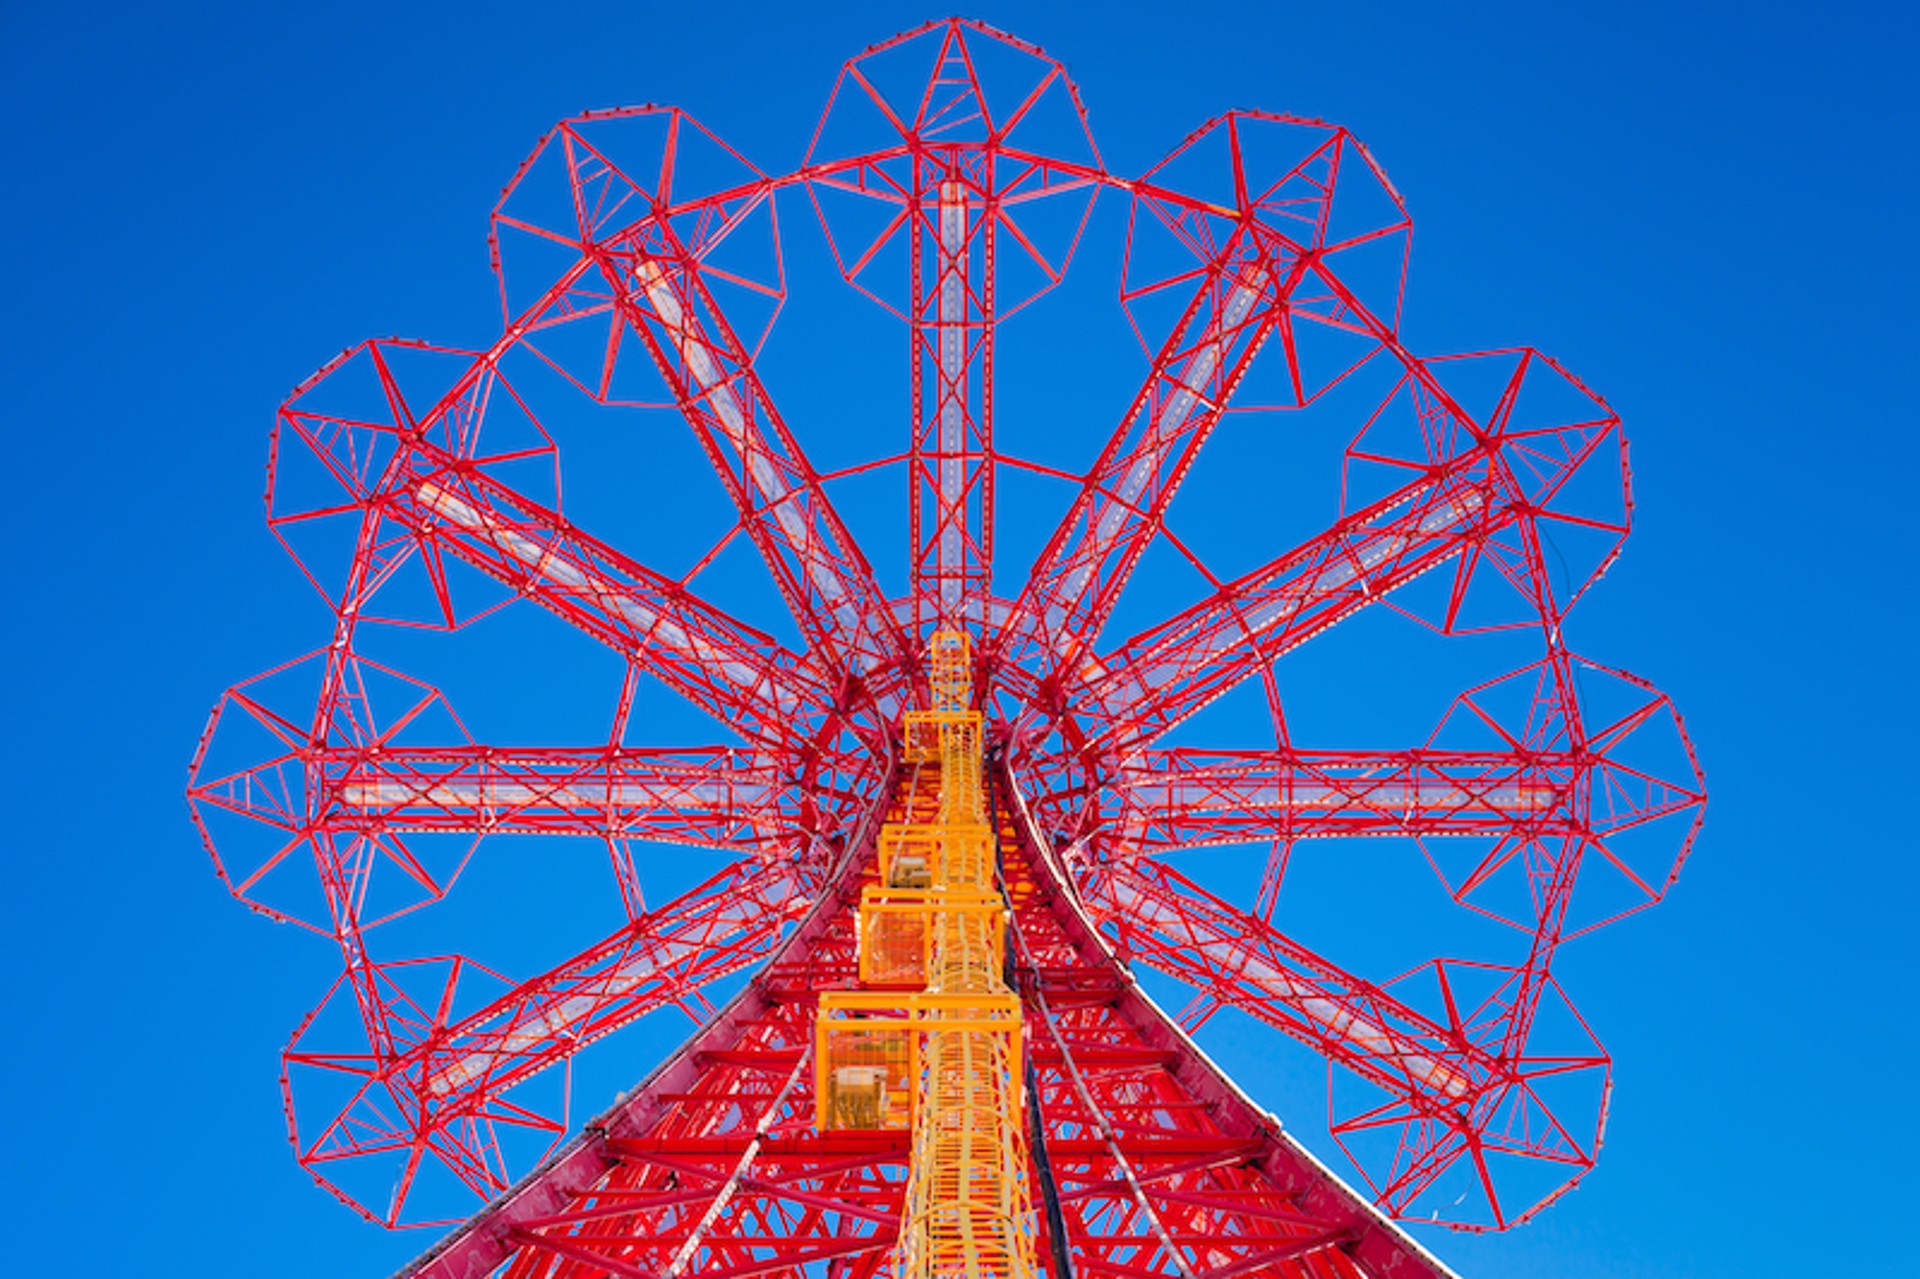 Coney Island Parachute Jump by Peter Mendelson